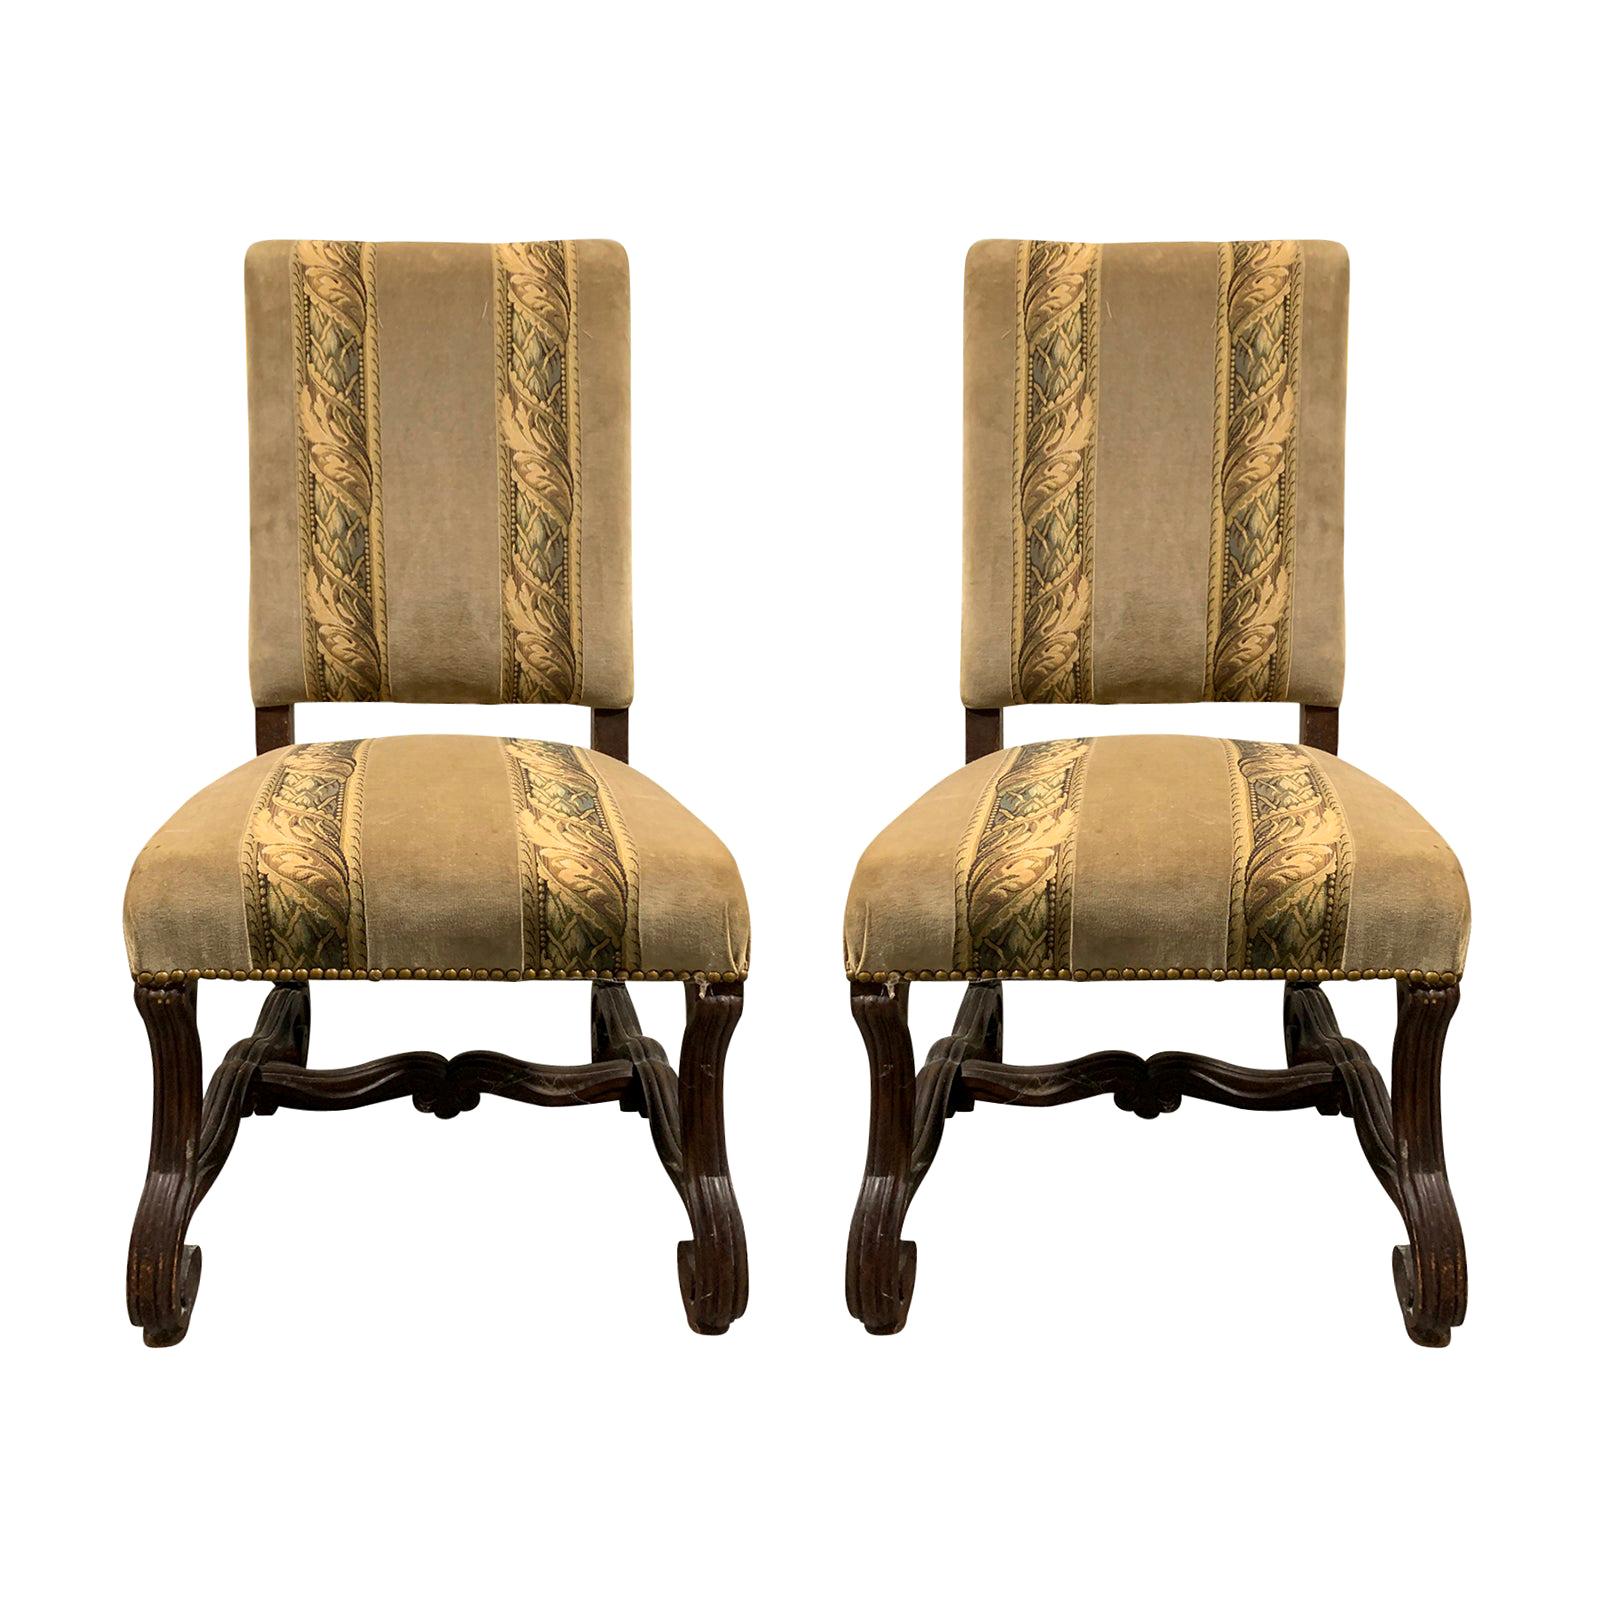 Pair of 19th Century Louis XIII Os de Mouton Upholstered Side Chairs